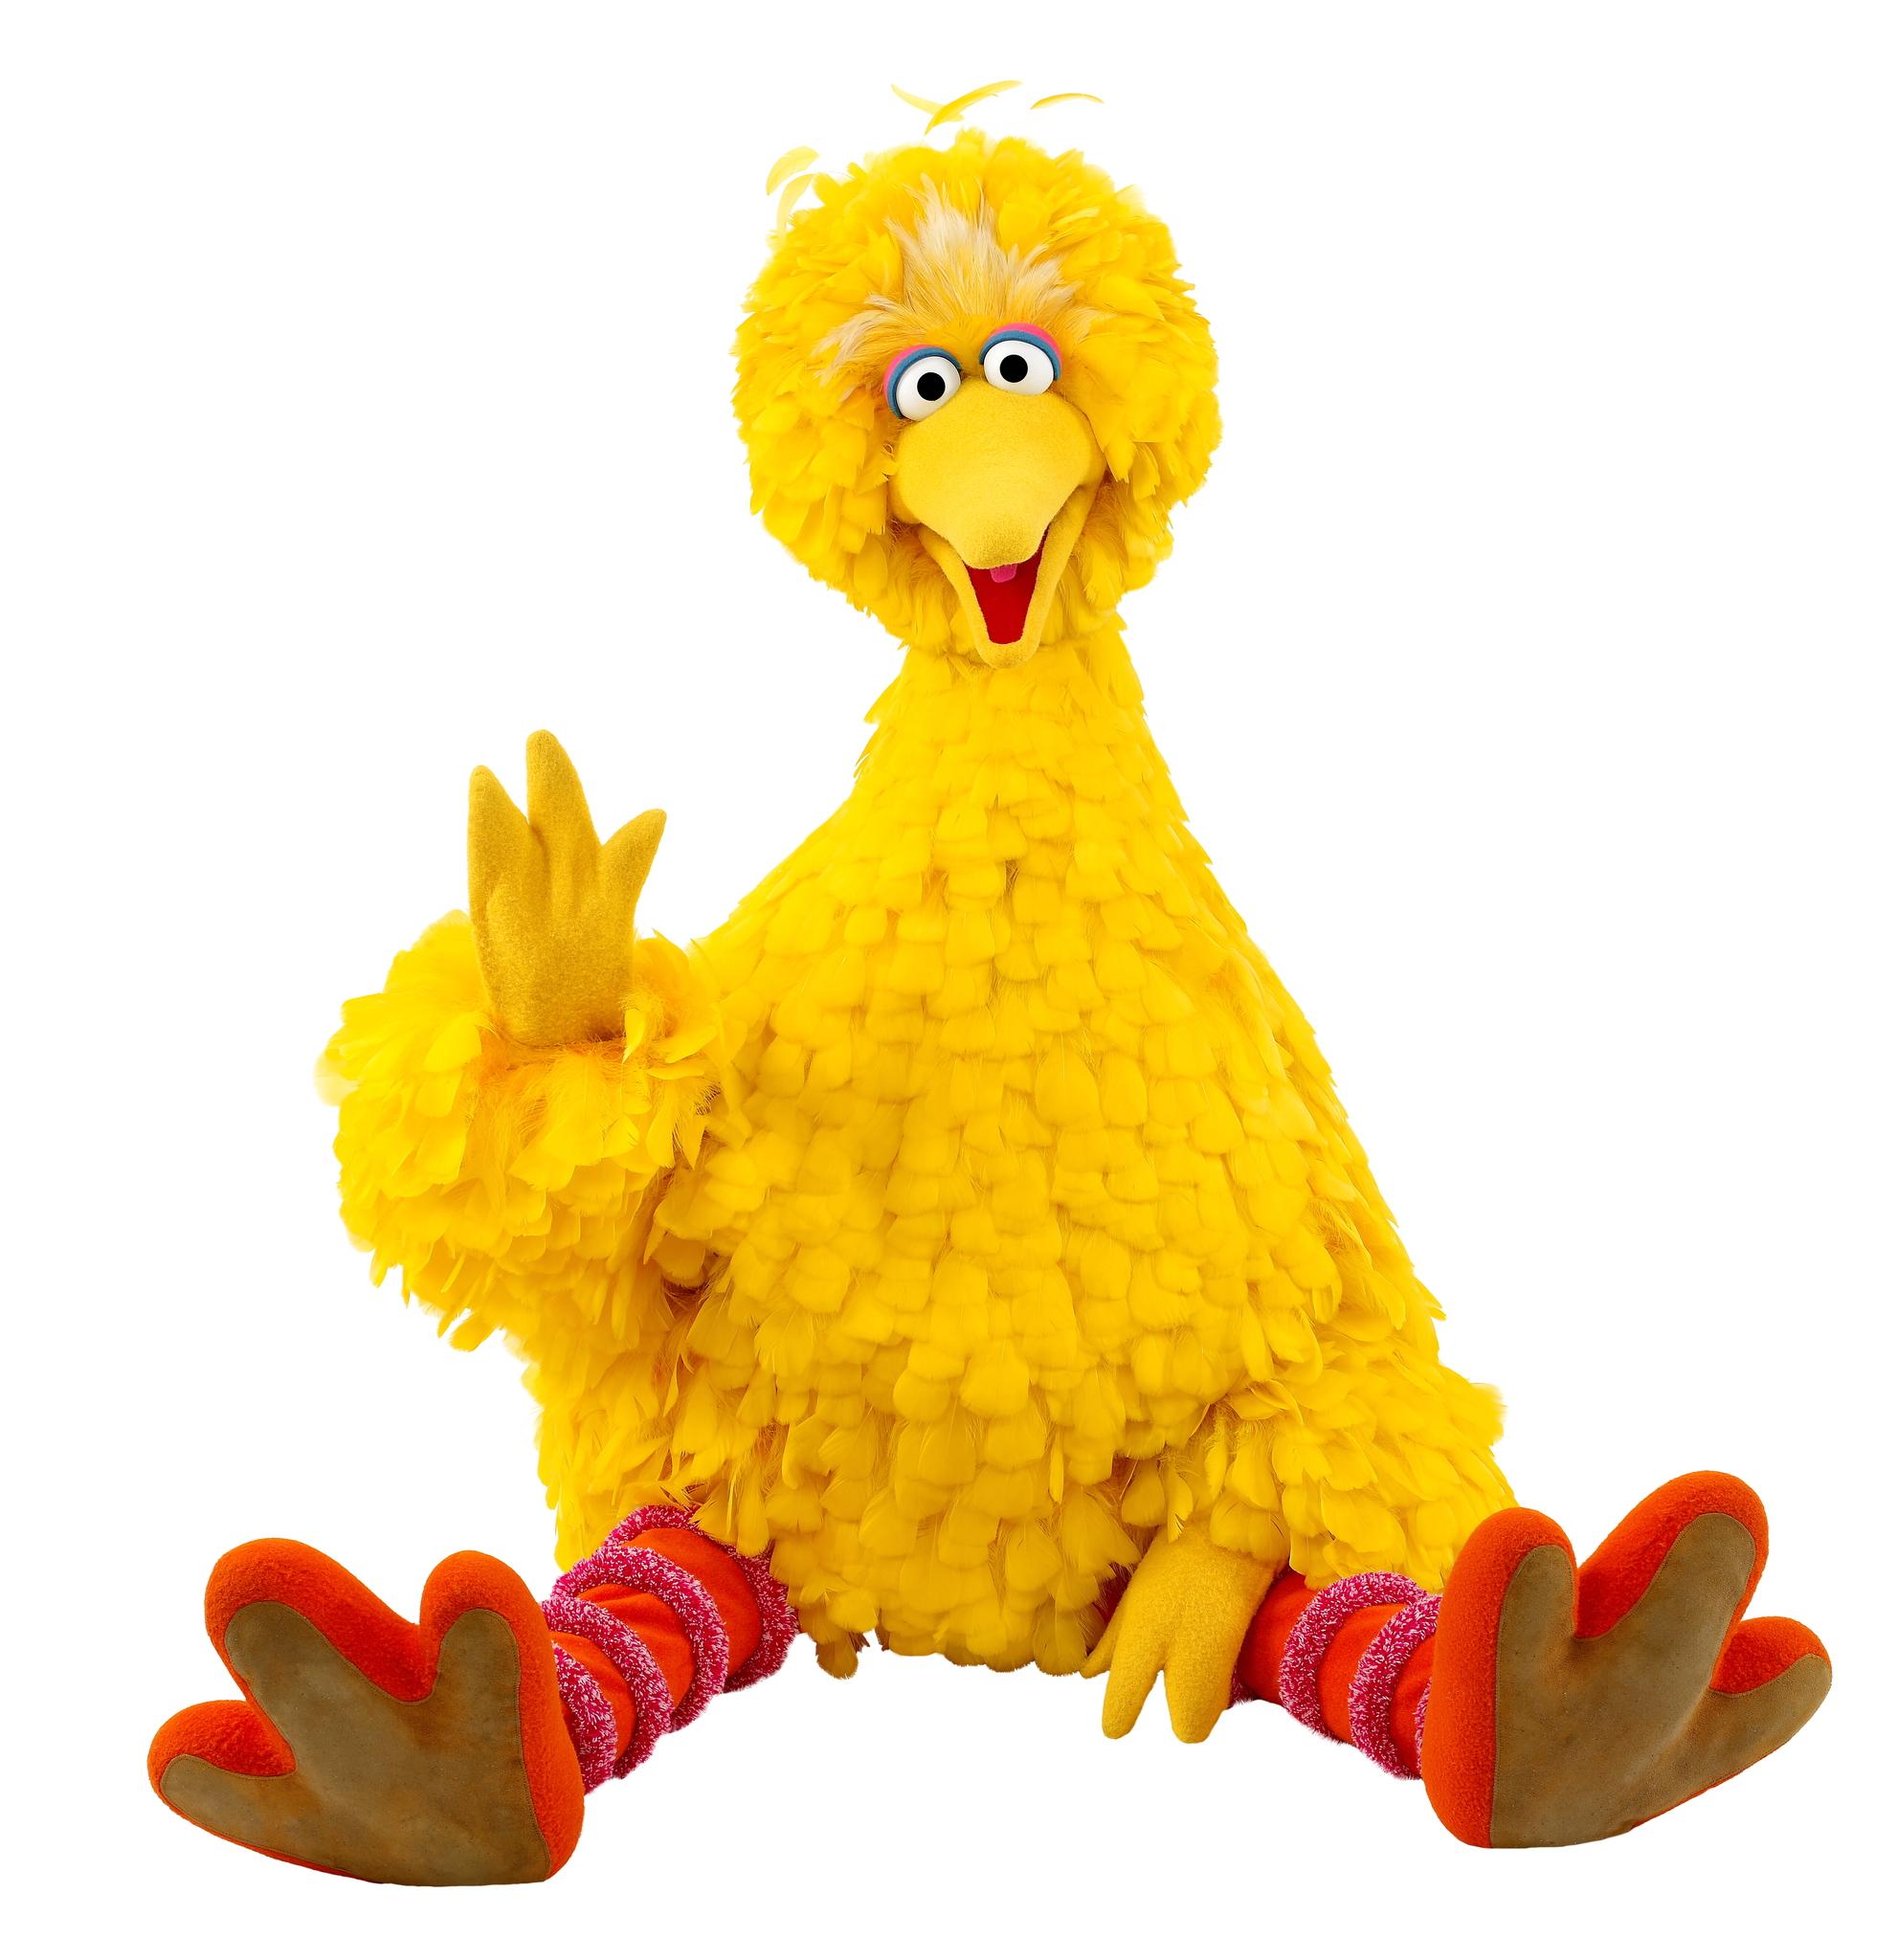 Guy who plays Big Bird drops the saddest story of all time | The ...